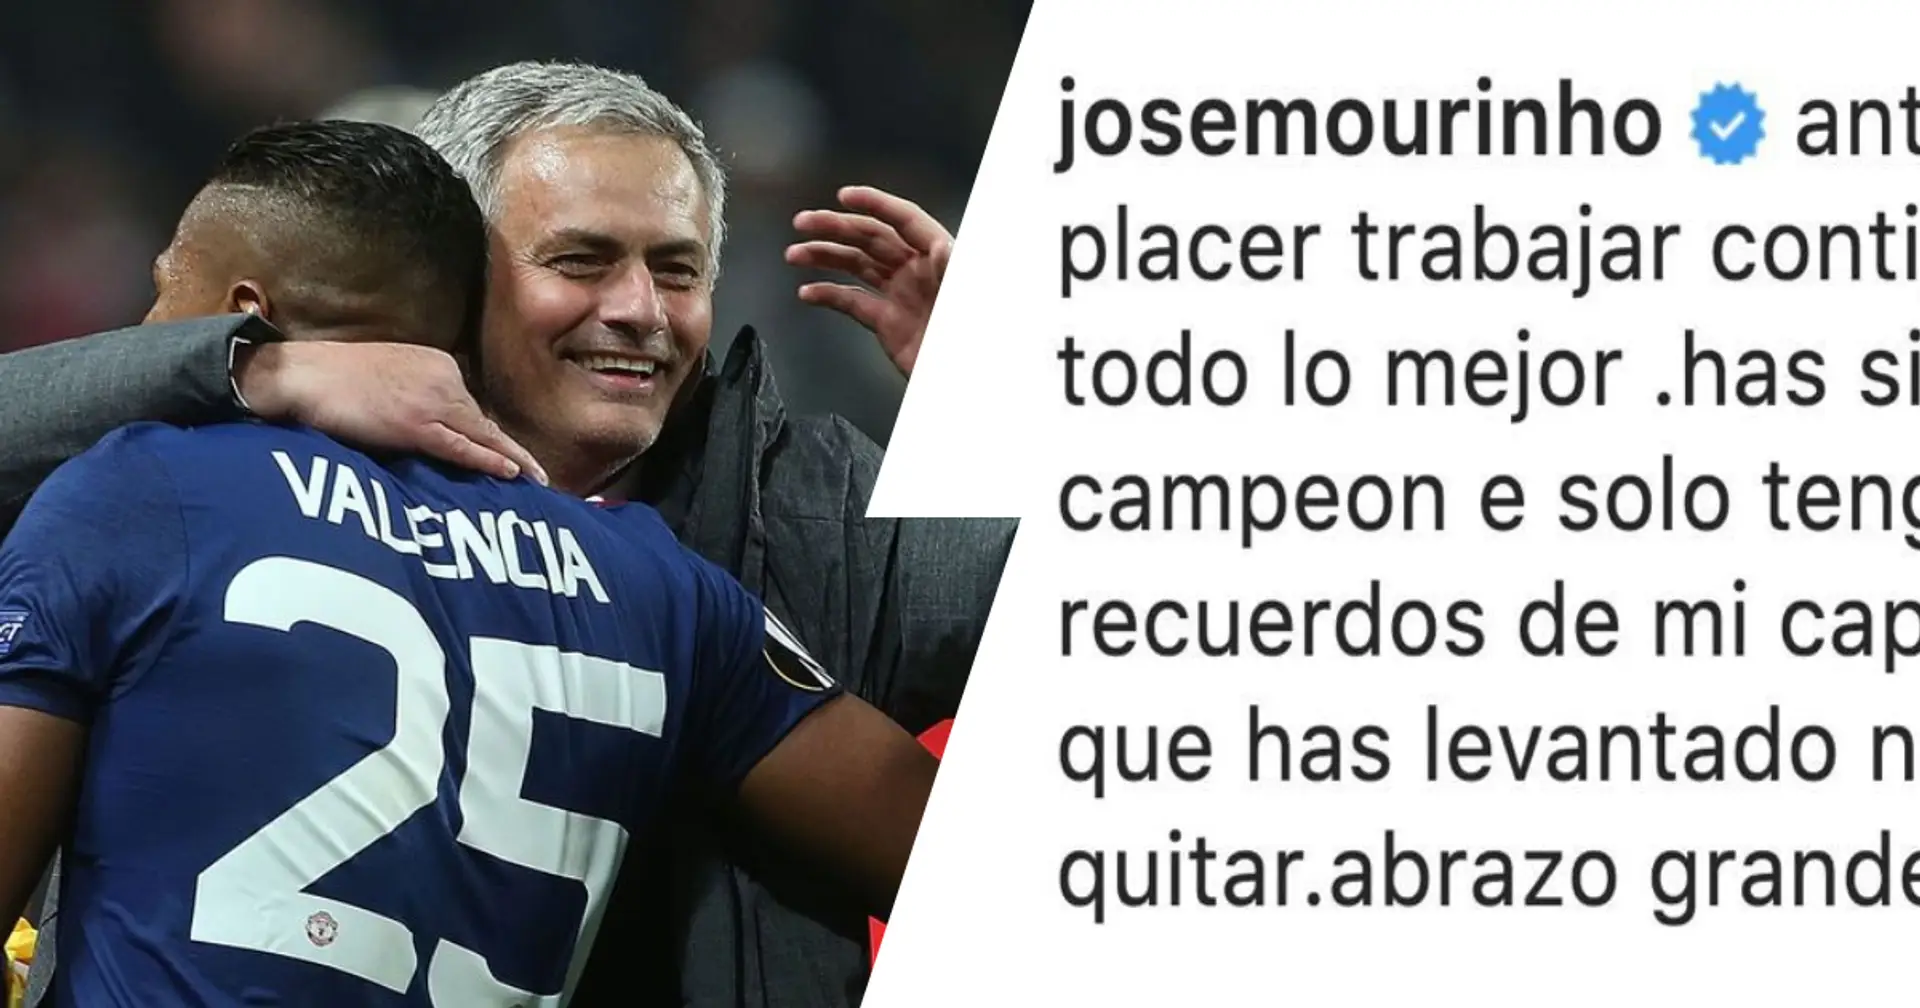 '3 cups that you raised can't be removed': Mourinho sends classy message to retiring Valencia